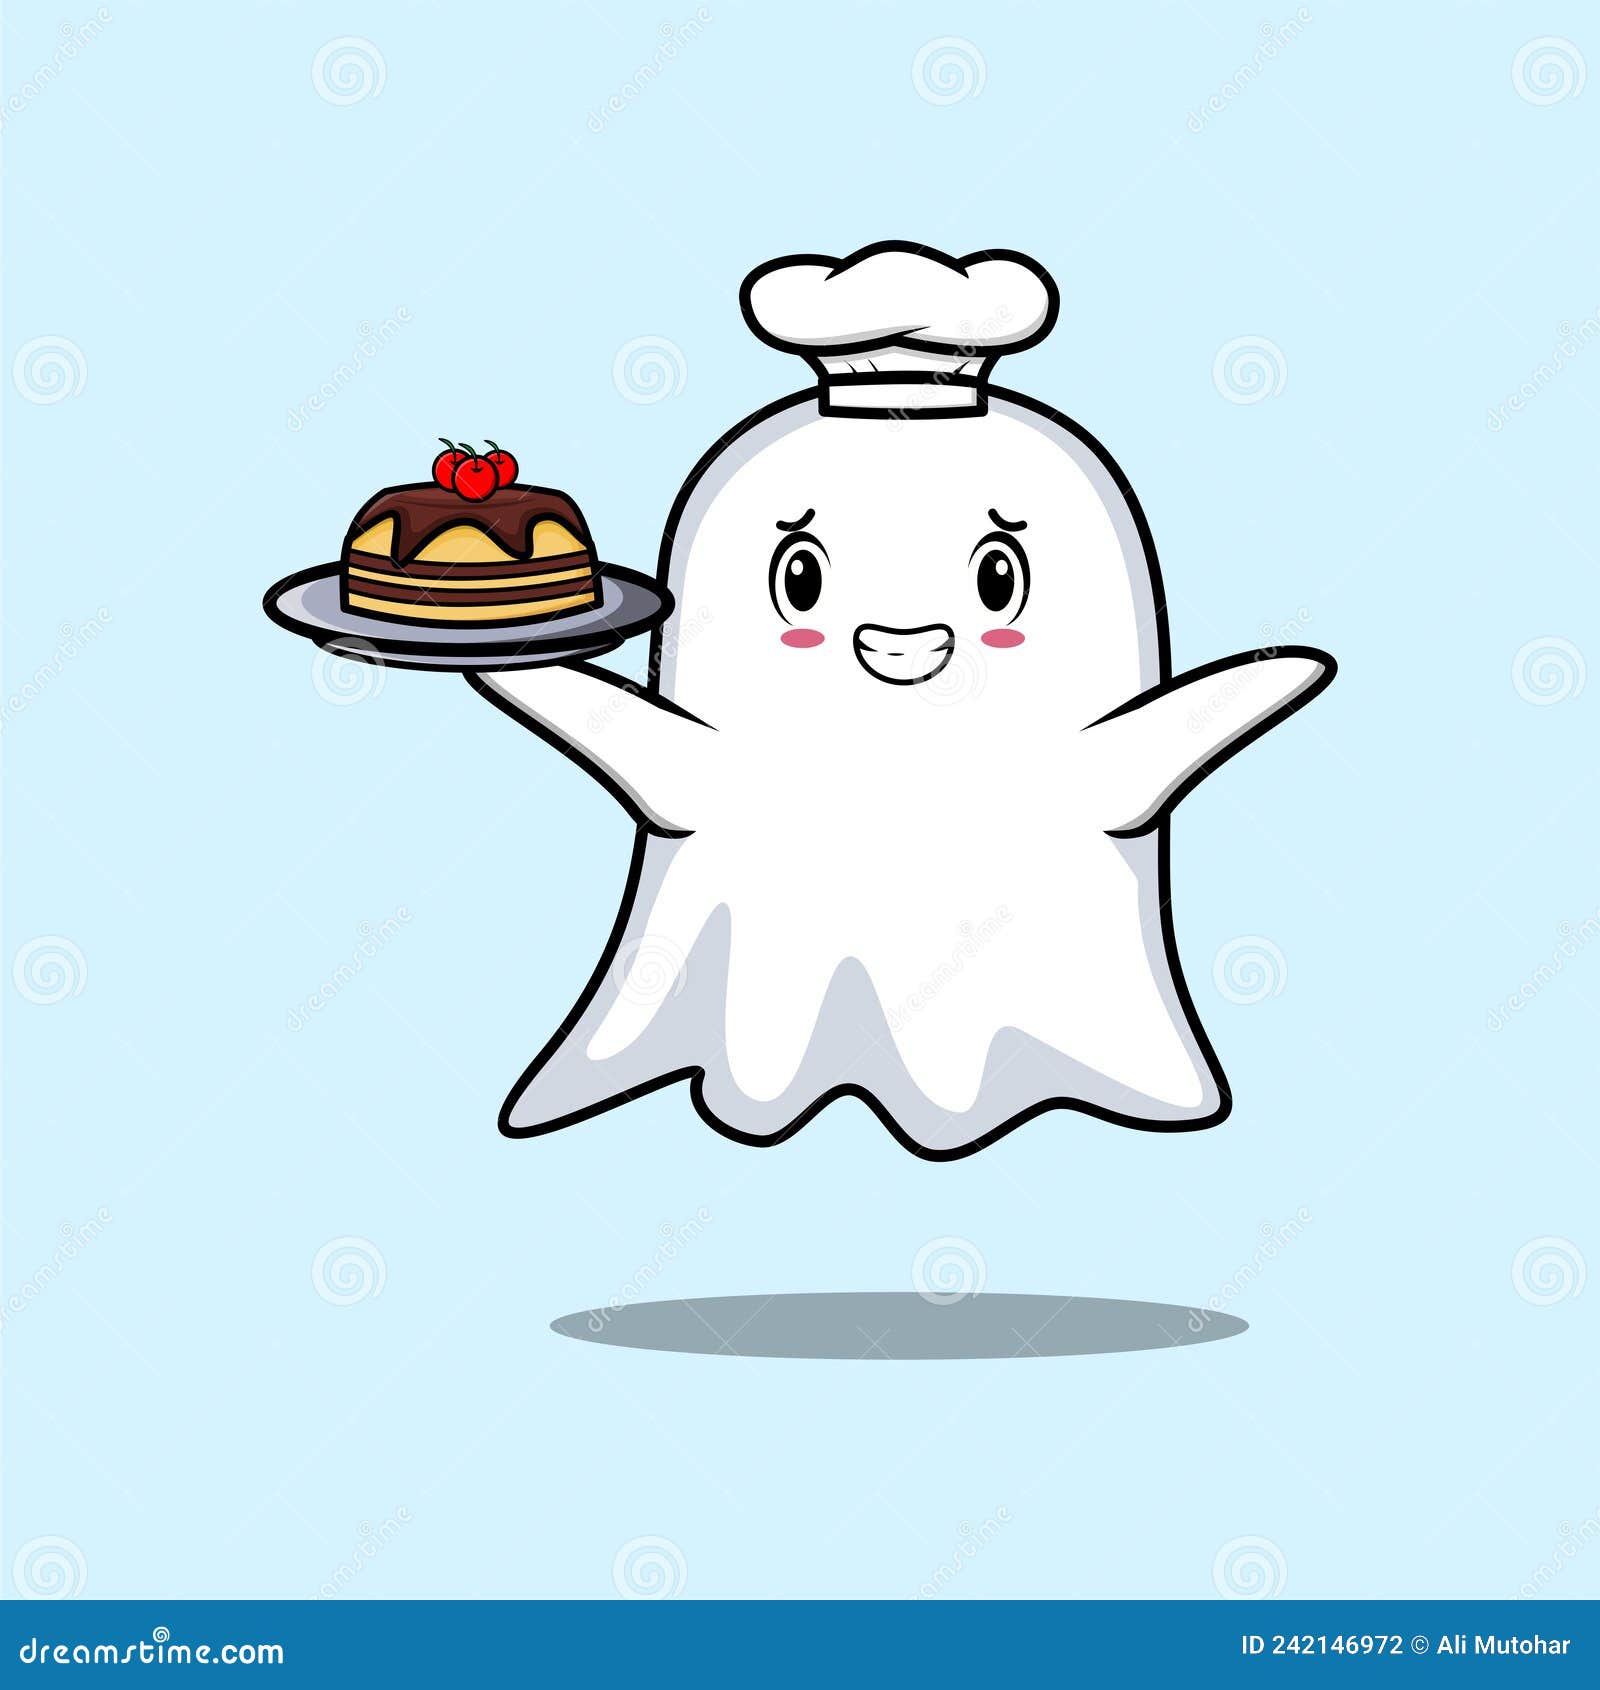 Cute Cartoon Chef Ghost Serving Cake on Tray Stock Vector ...